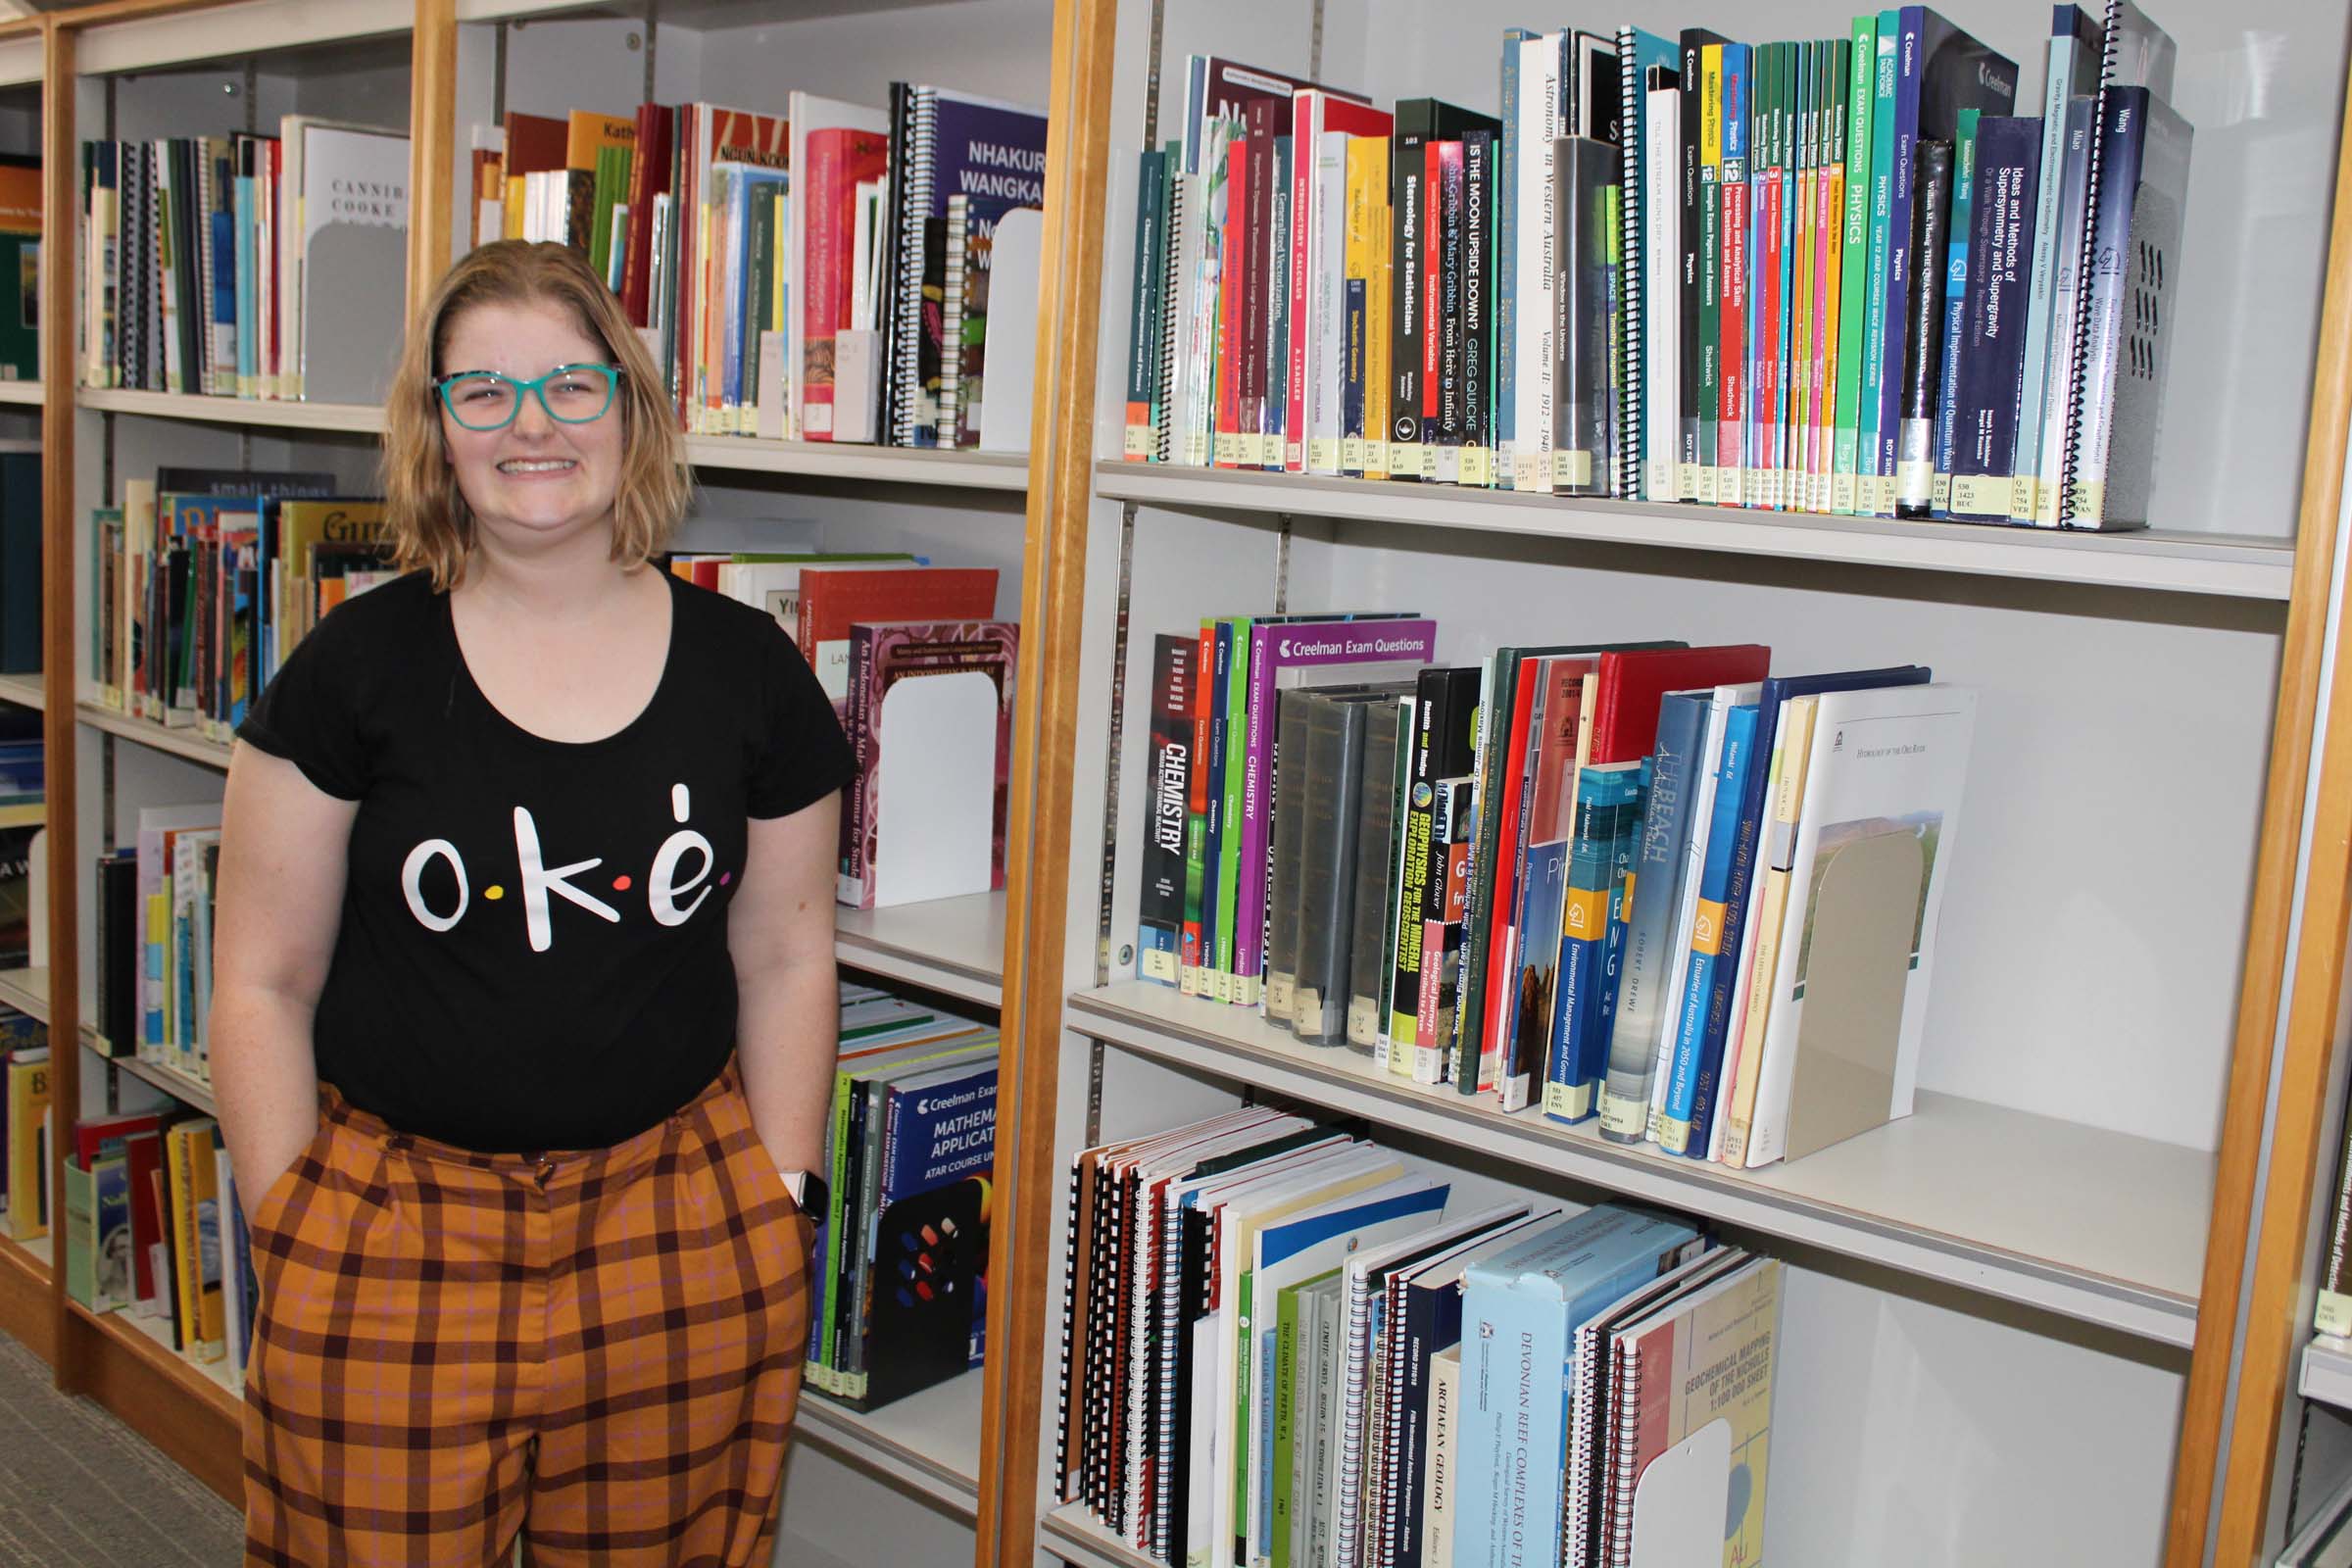 A lady smiles brightly and stands in front of bookshelves with her hands in her pockets.